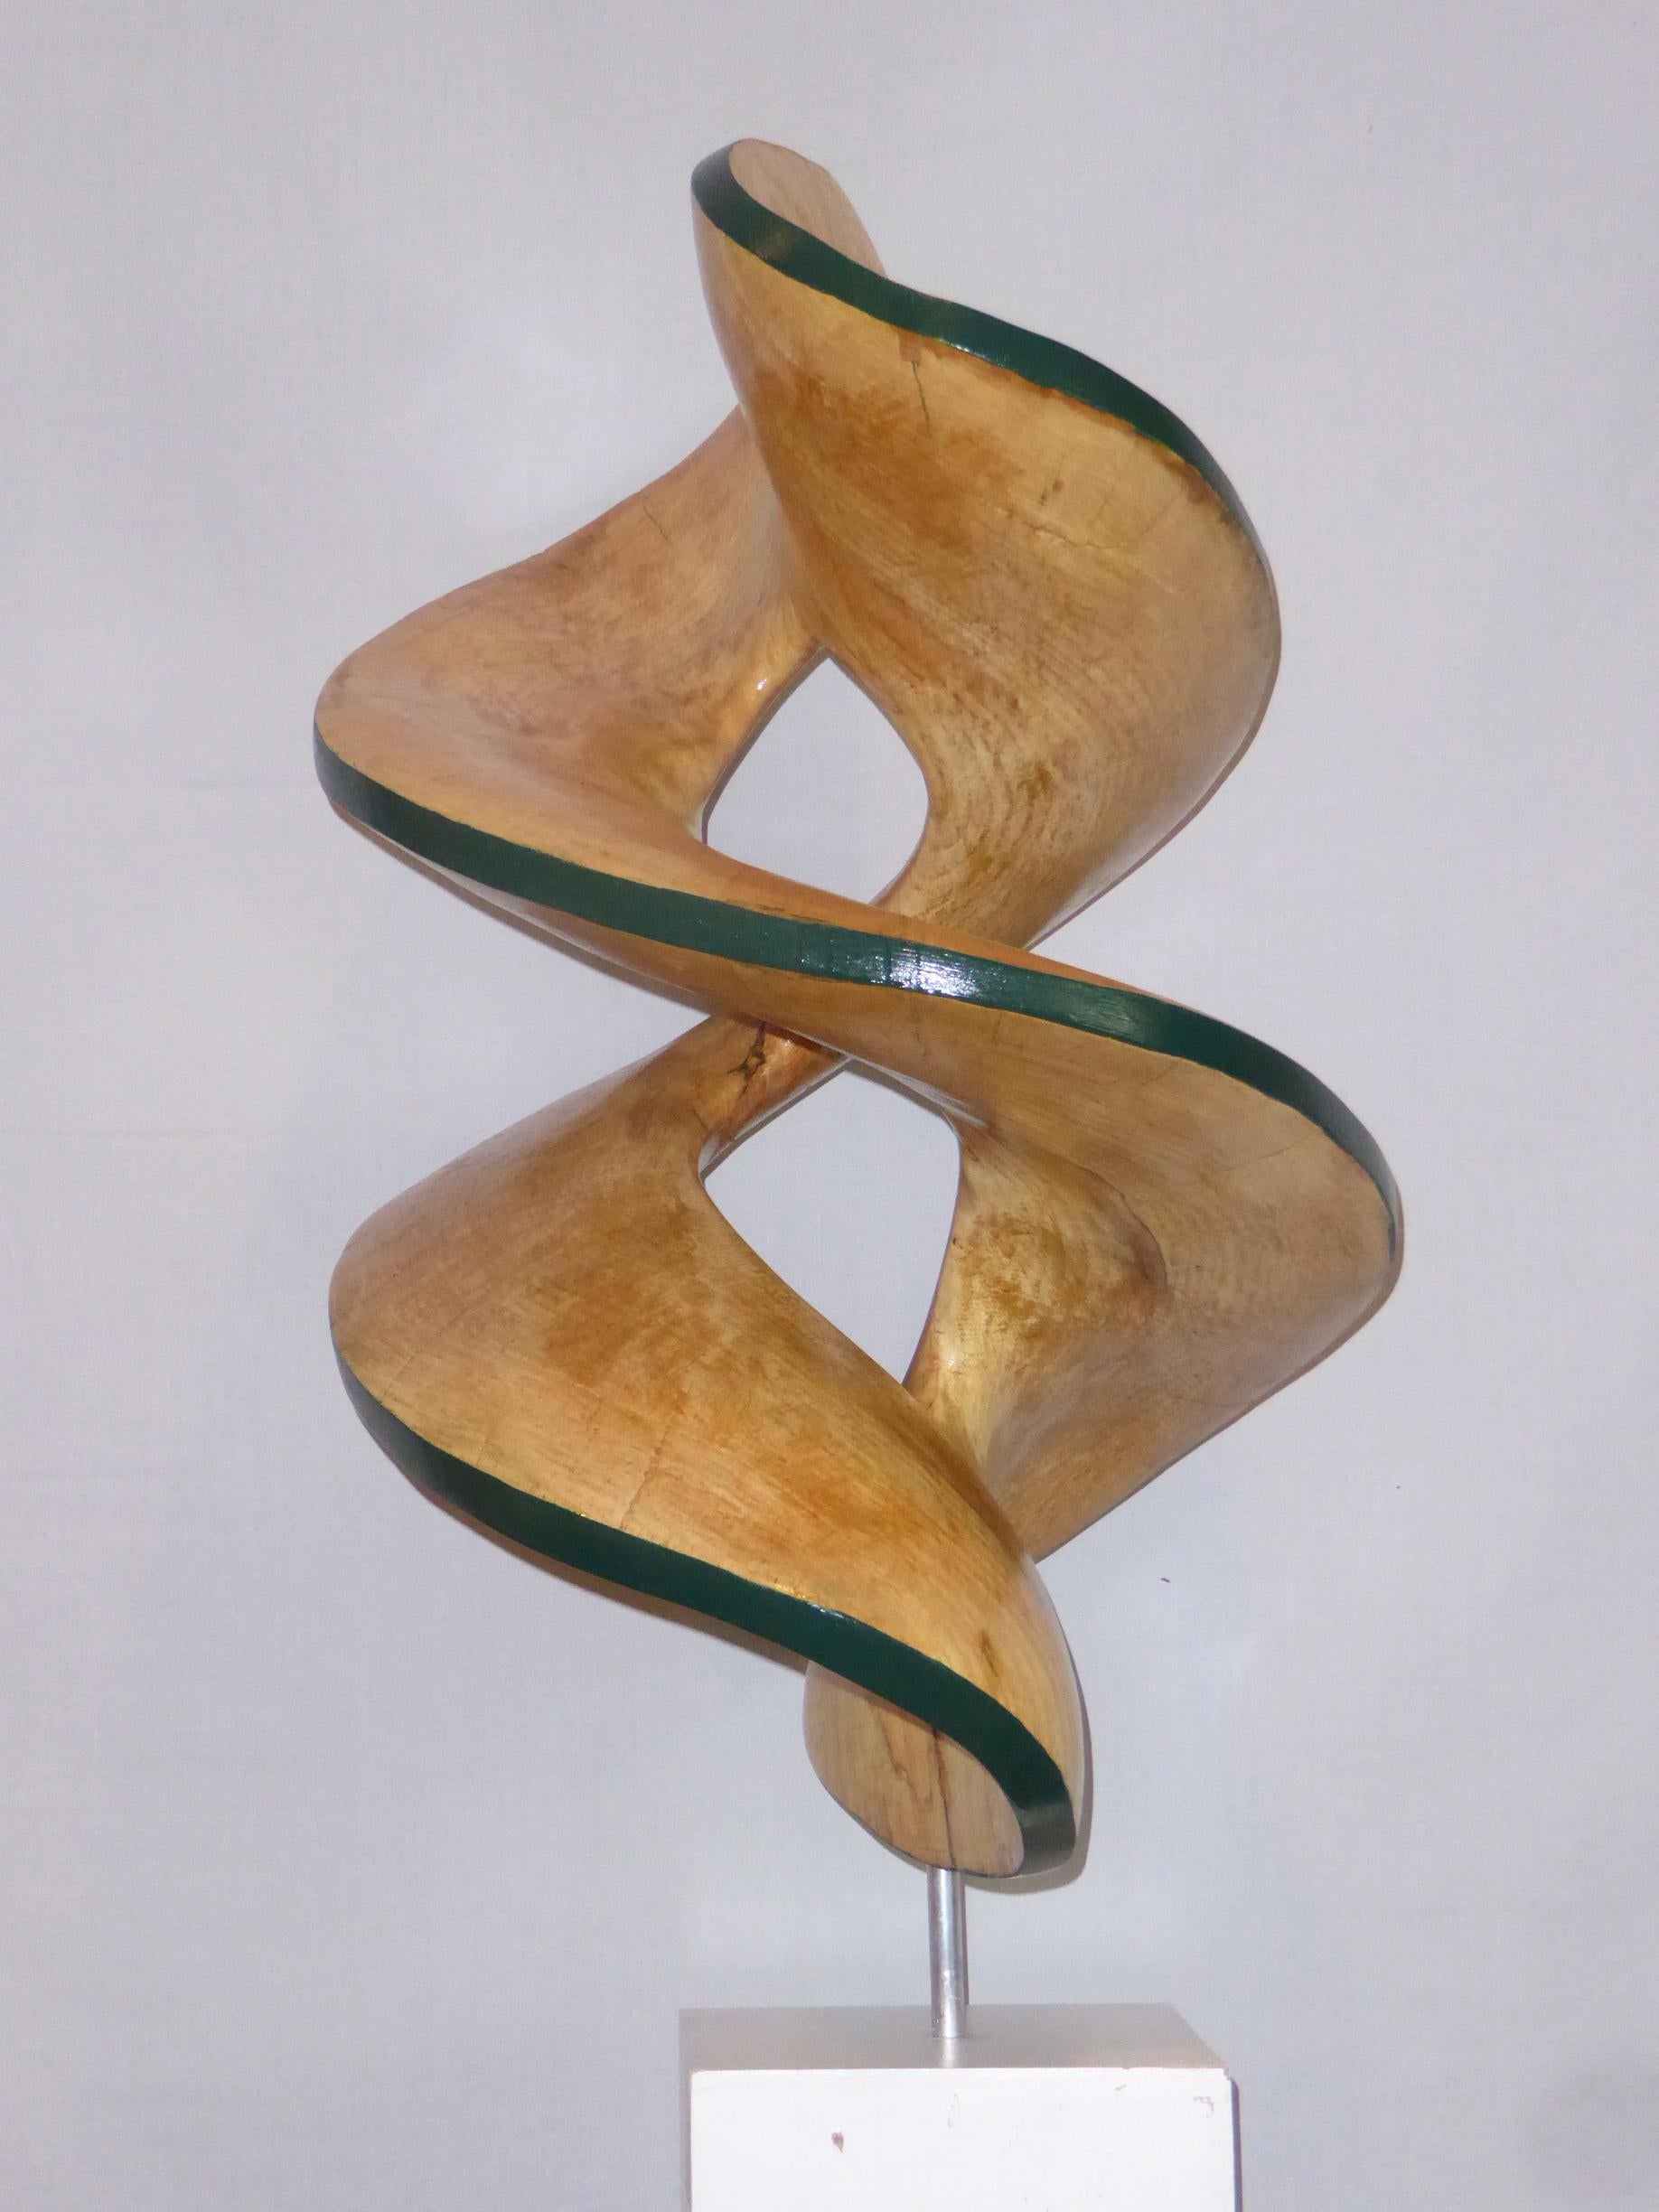 Spiral#3-Green, large maple sculpture - Sculpture by Eric Pesso